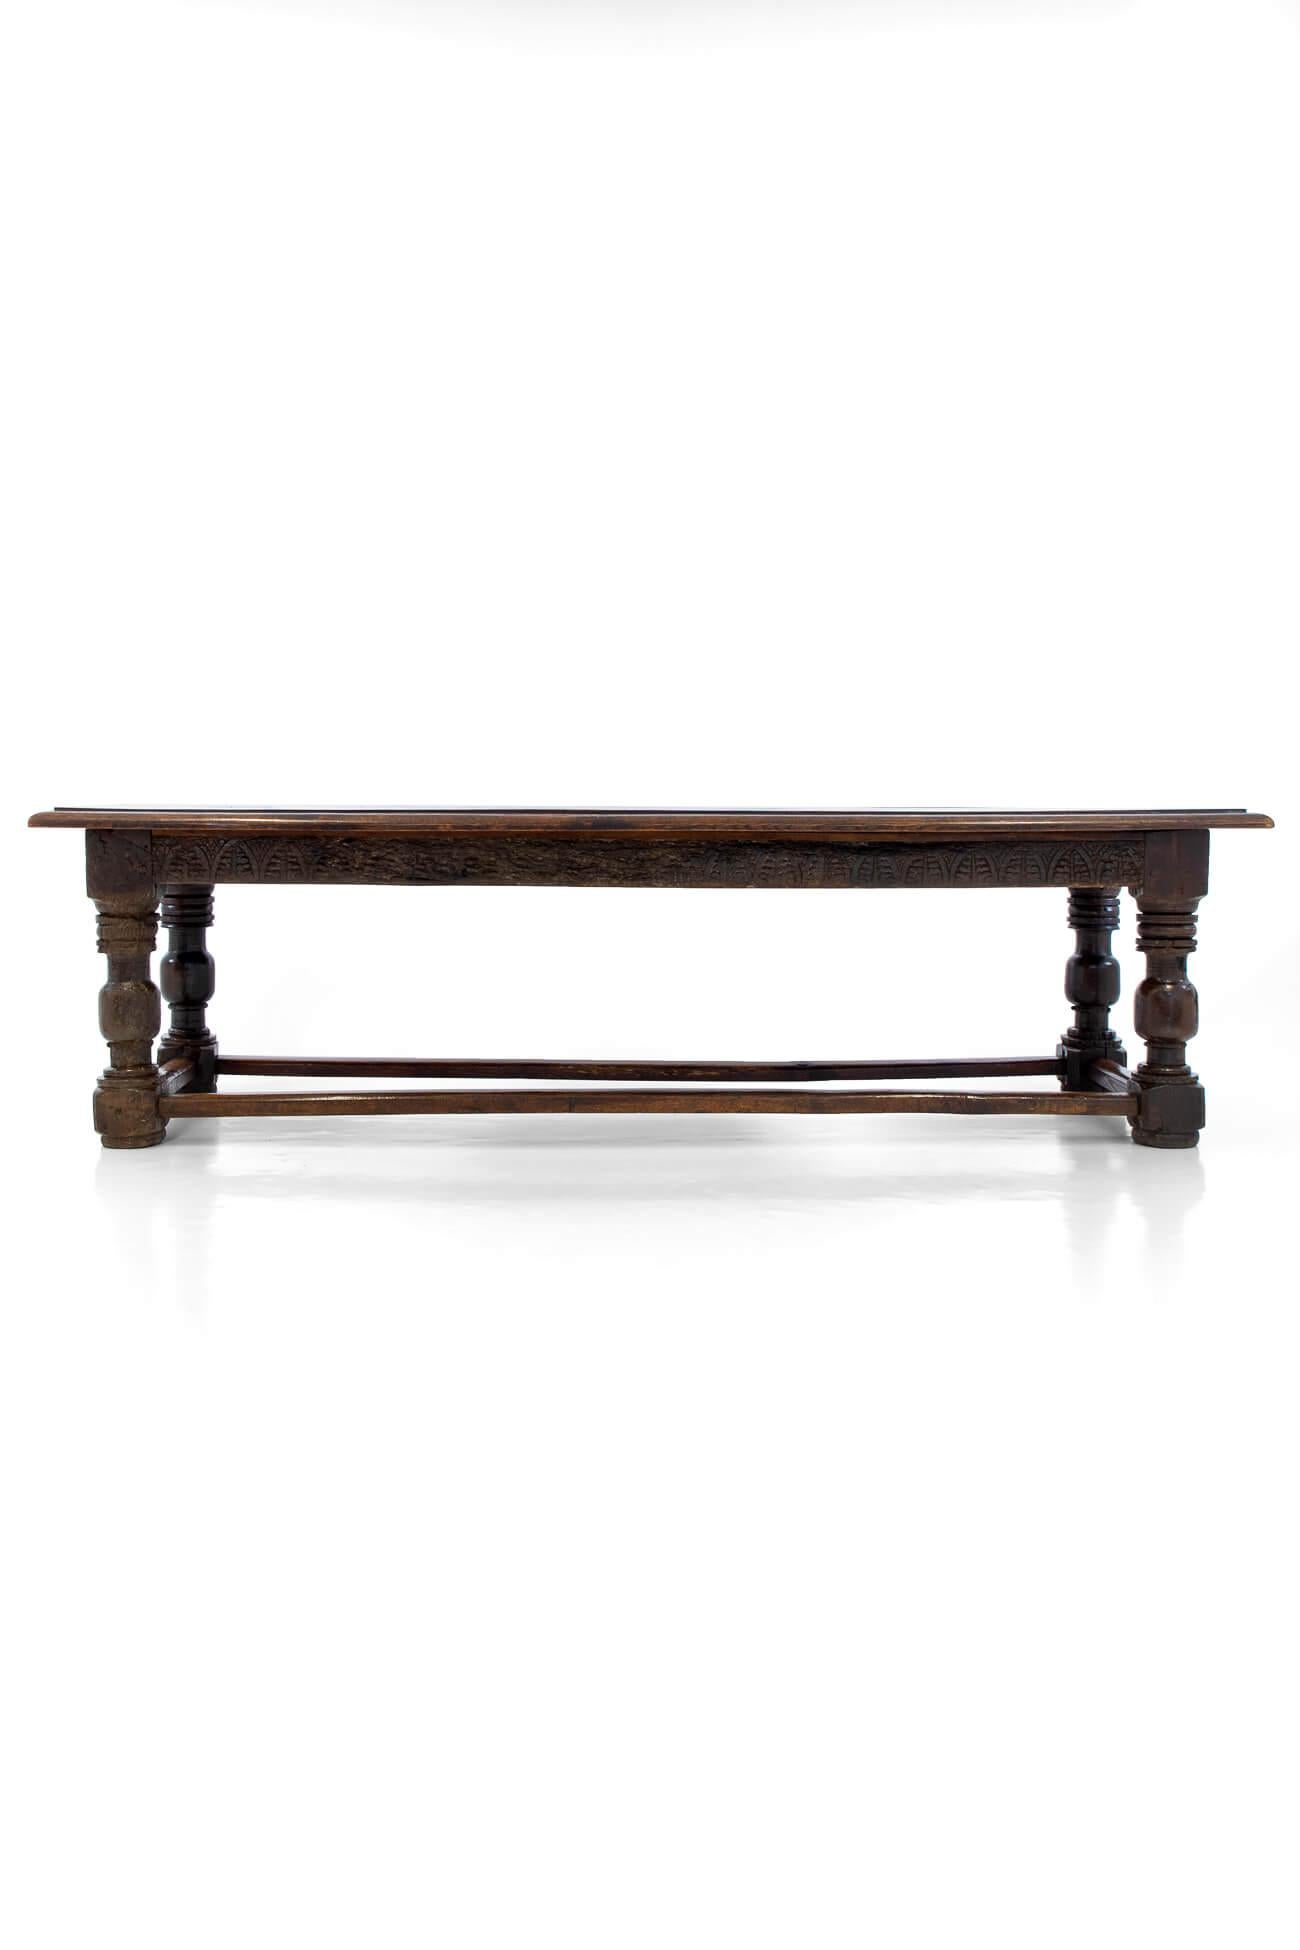 Early 19th century English Oak refectory table with moulded edge and earlier 18th century elements to the table base. Heavy triple plank top over decorative hand-carved stiff leaf frieze and four turned balusters legs united by a box stretcher.
The